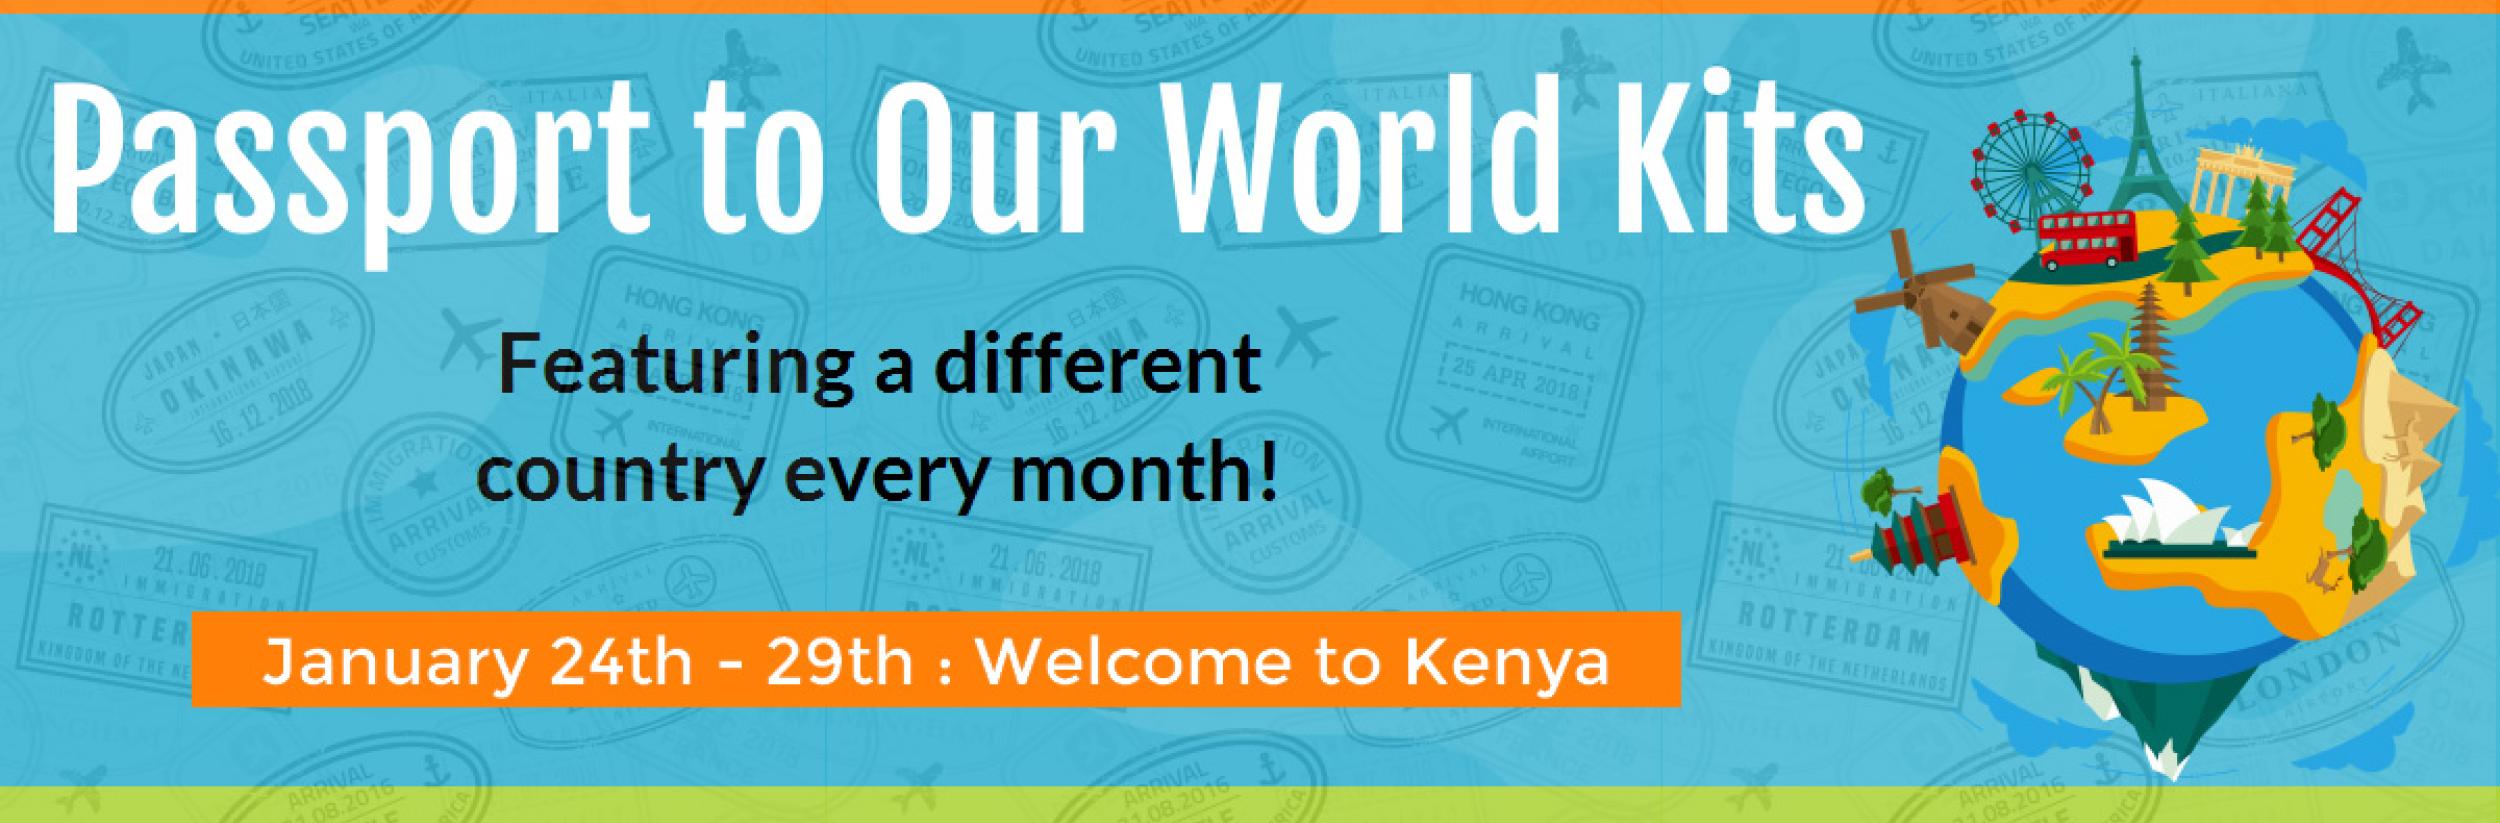 Image for "Passport to Our World: Kenya"